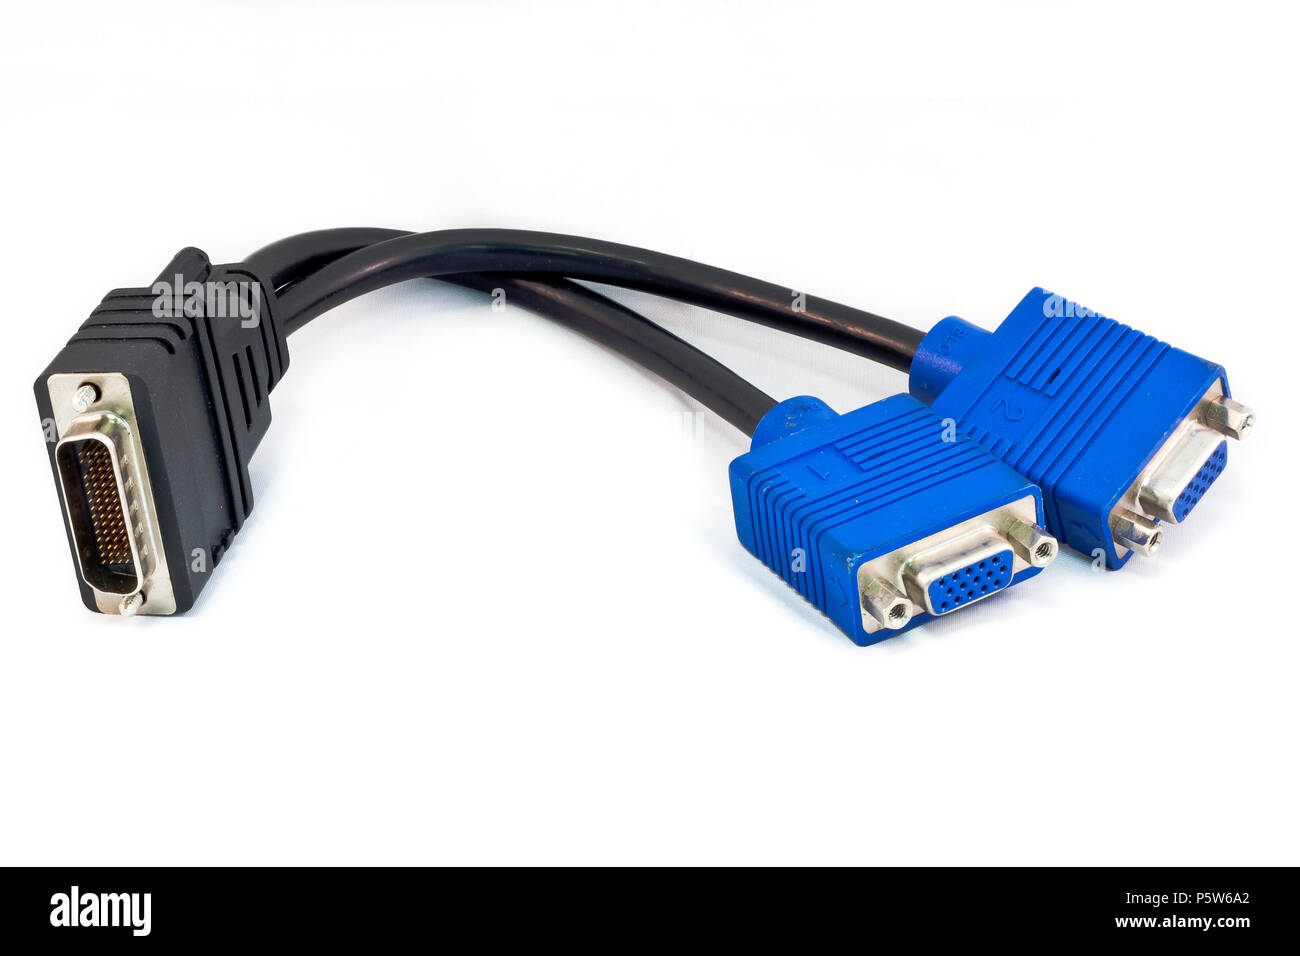 dual vga cable to connect two monitors to a computer on a white background  Stock Photo - Alamy